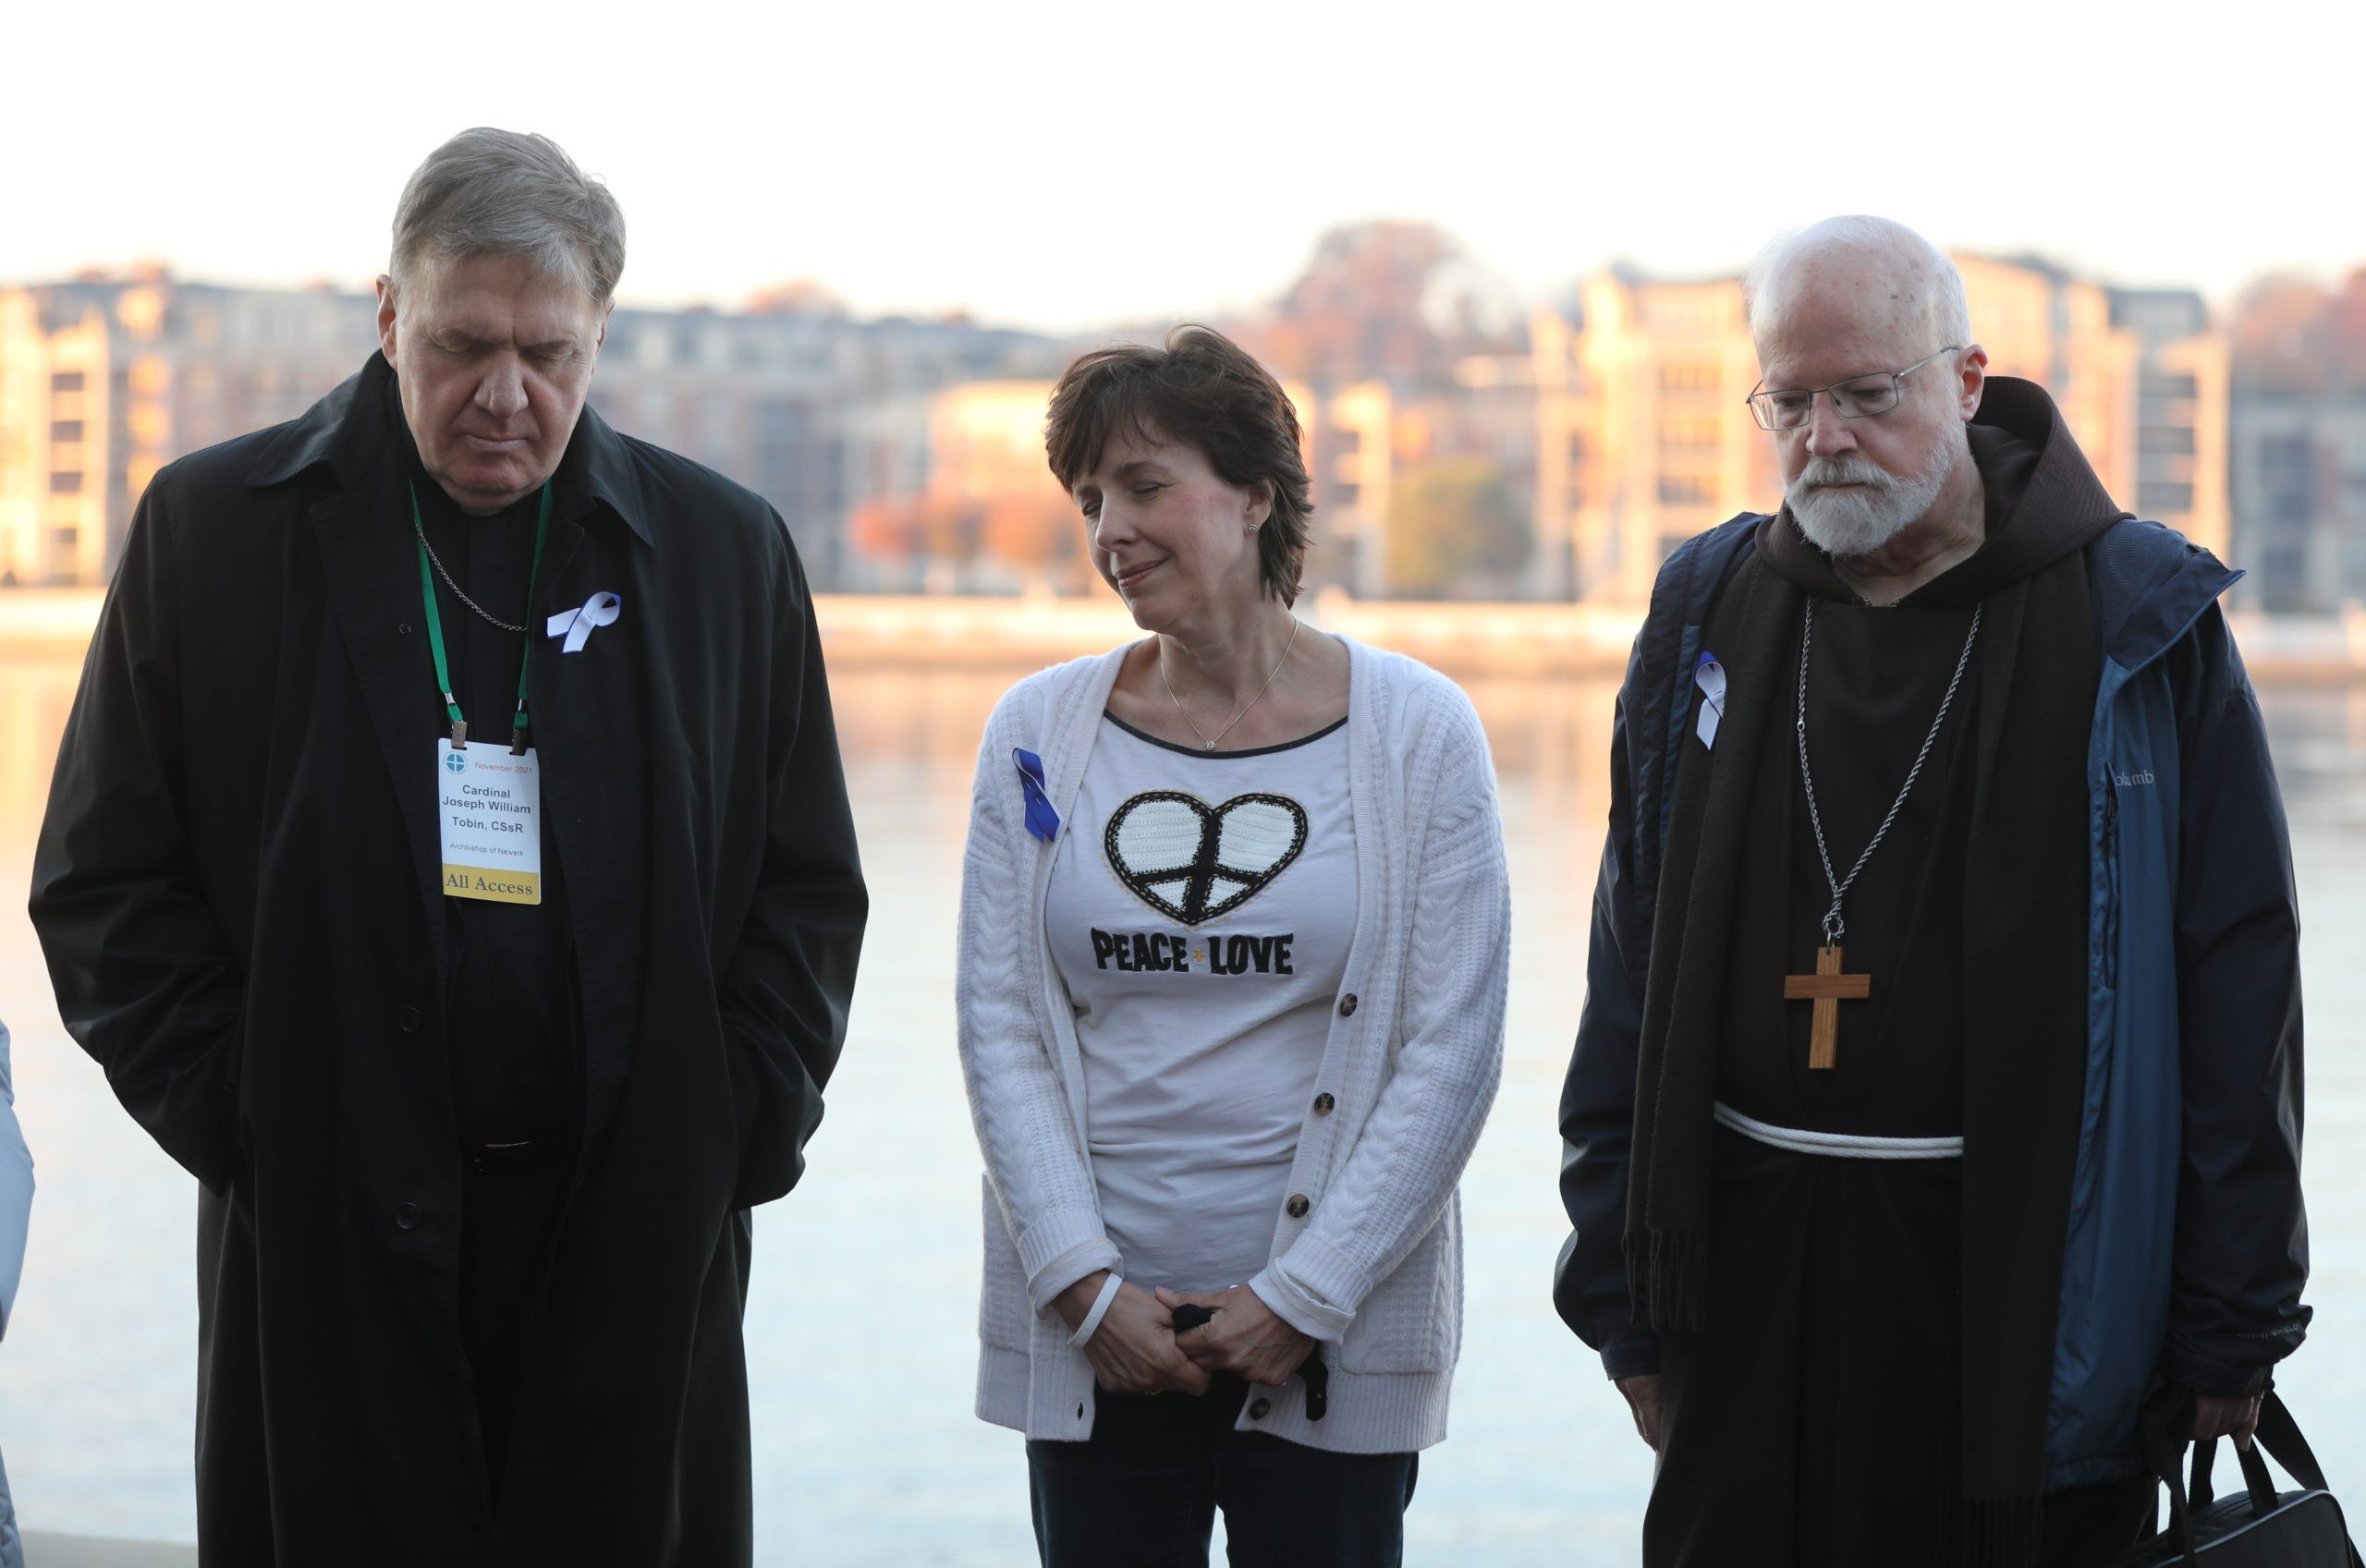 Cardinals Joseph W. Tobin of Newark, N.J., and Seán P. O'Malley of Boston, president of the Pontifical Commission for the Protection of Minors, pray alongside organizer Jennifer Wortham before a sunrise walk to end abuse Nov. 18, 2021, outside the hotel in Baltimore where the fall general assembly of the U.S. Conference of Catholic Bishops was held Nov. 15-18. (CNS photo/Bob Roller)